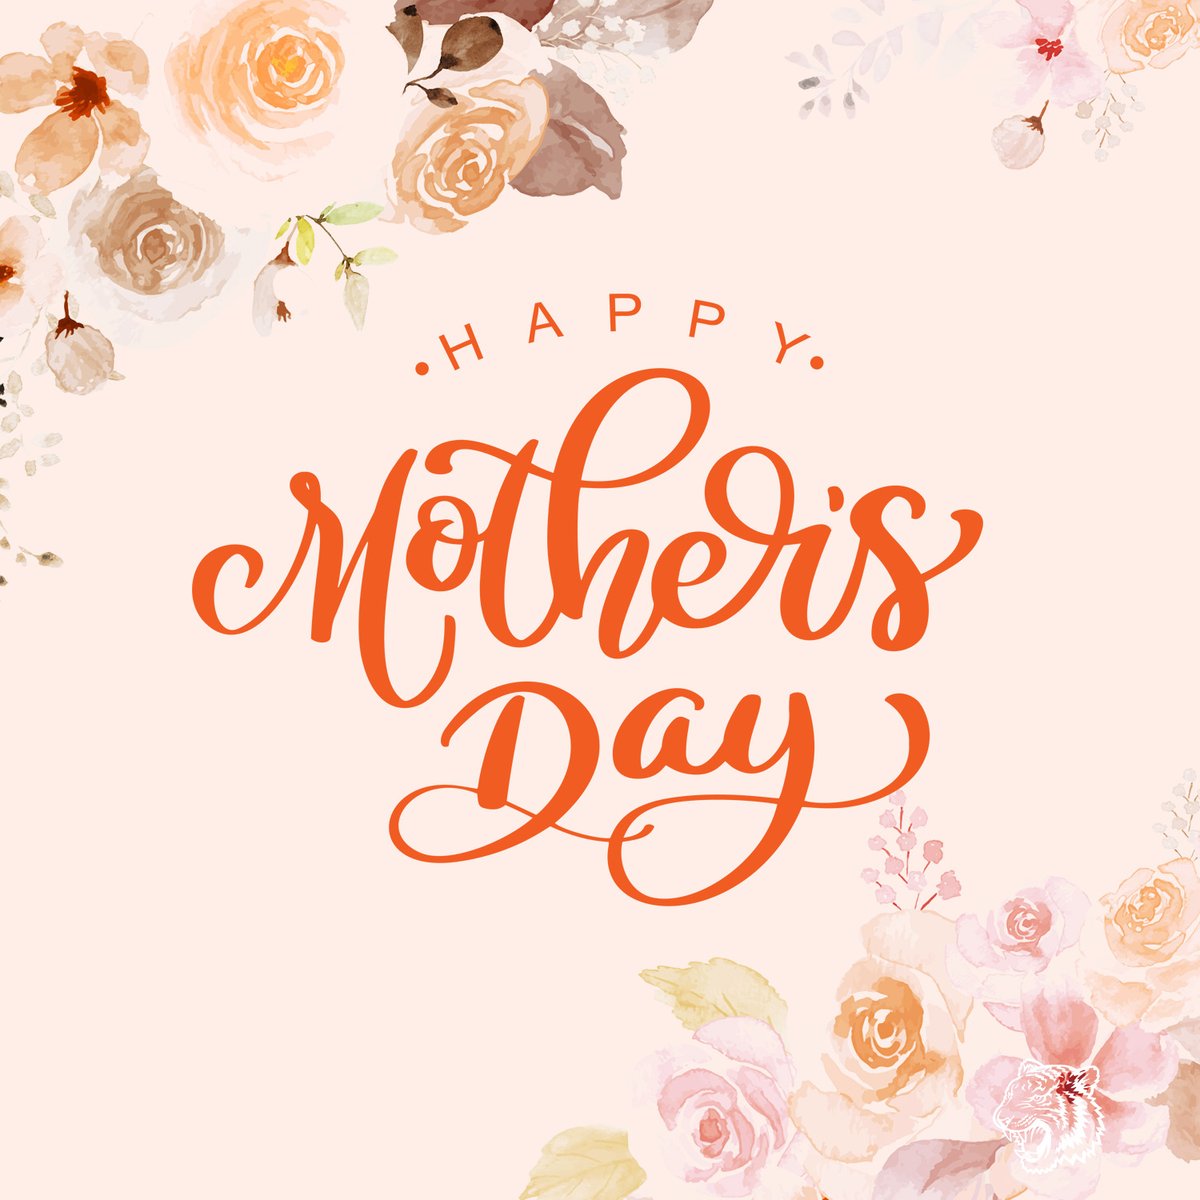 Happy Mother's Day to all the moms and motherly figures in the Tiger Family! 🐯 #TheCommunitysCollege